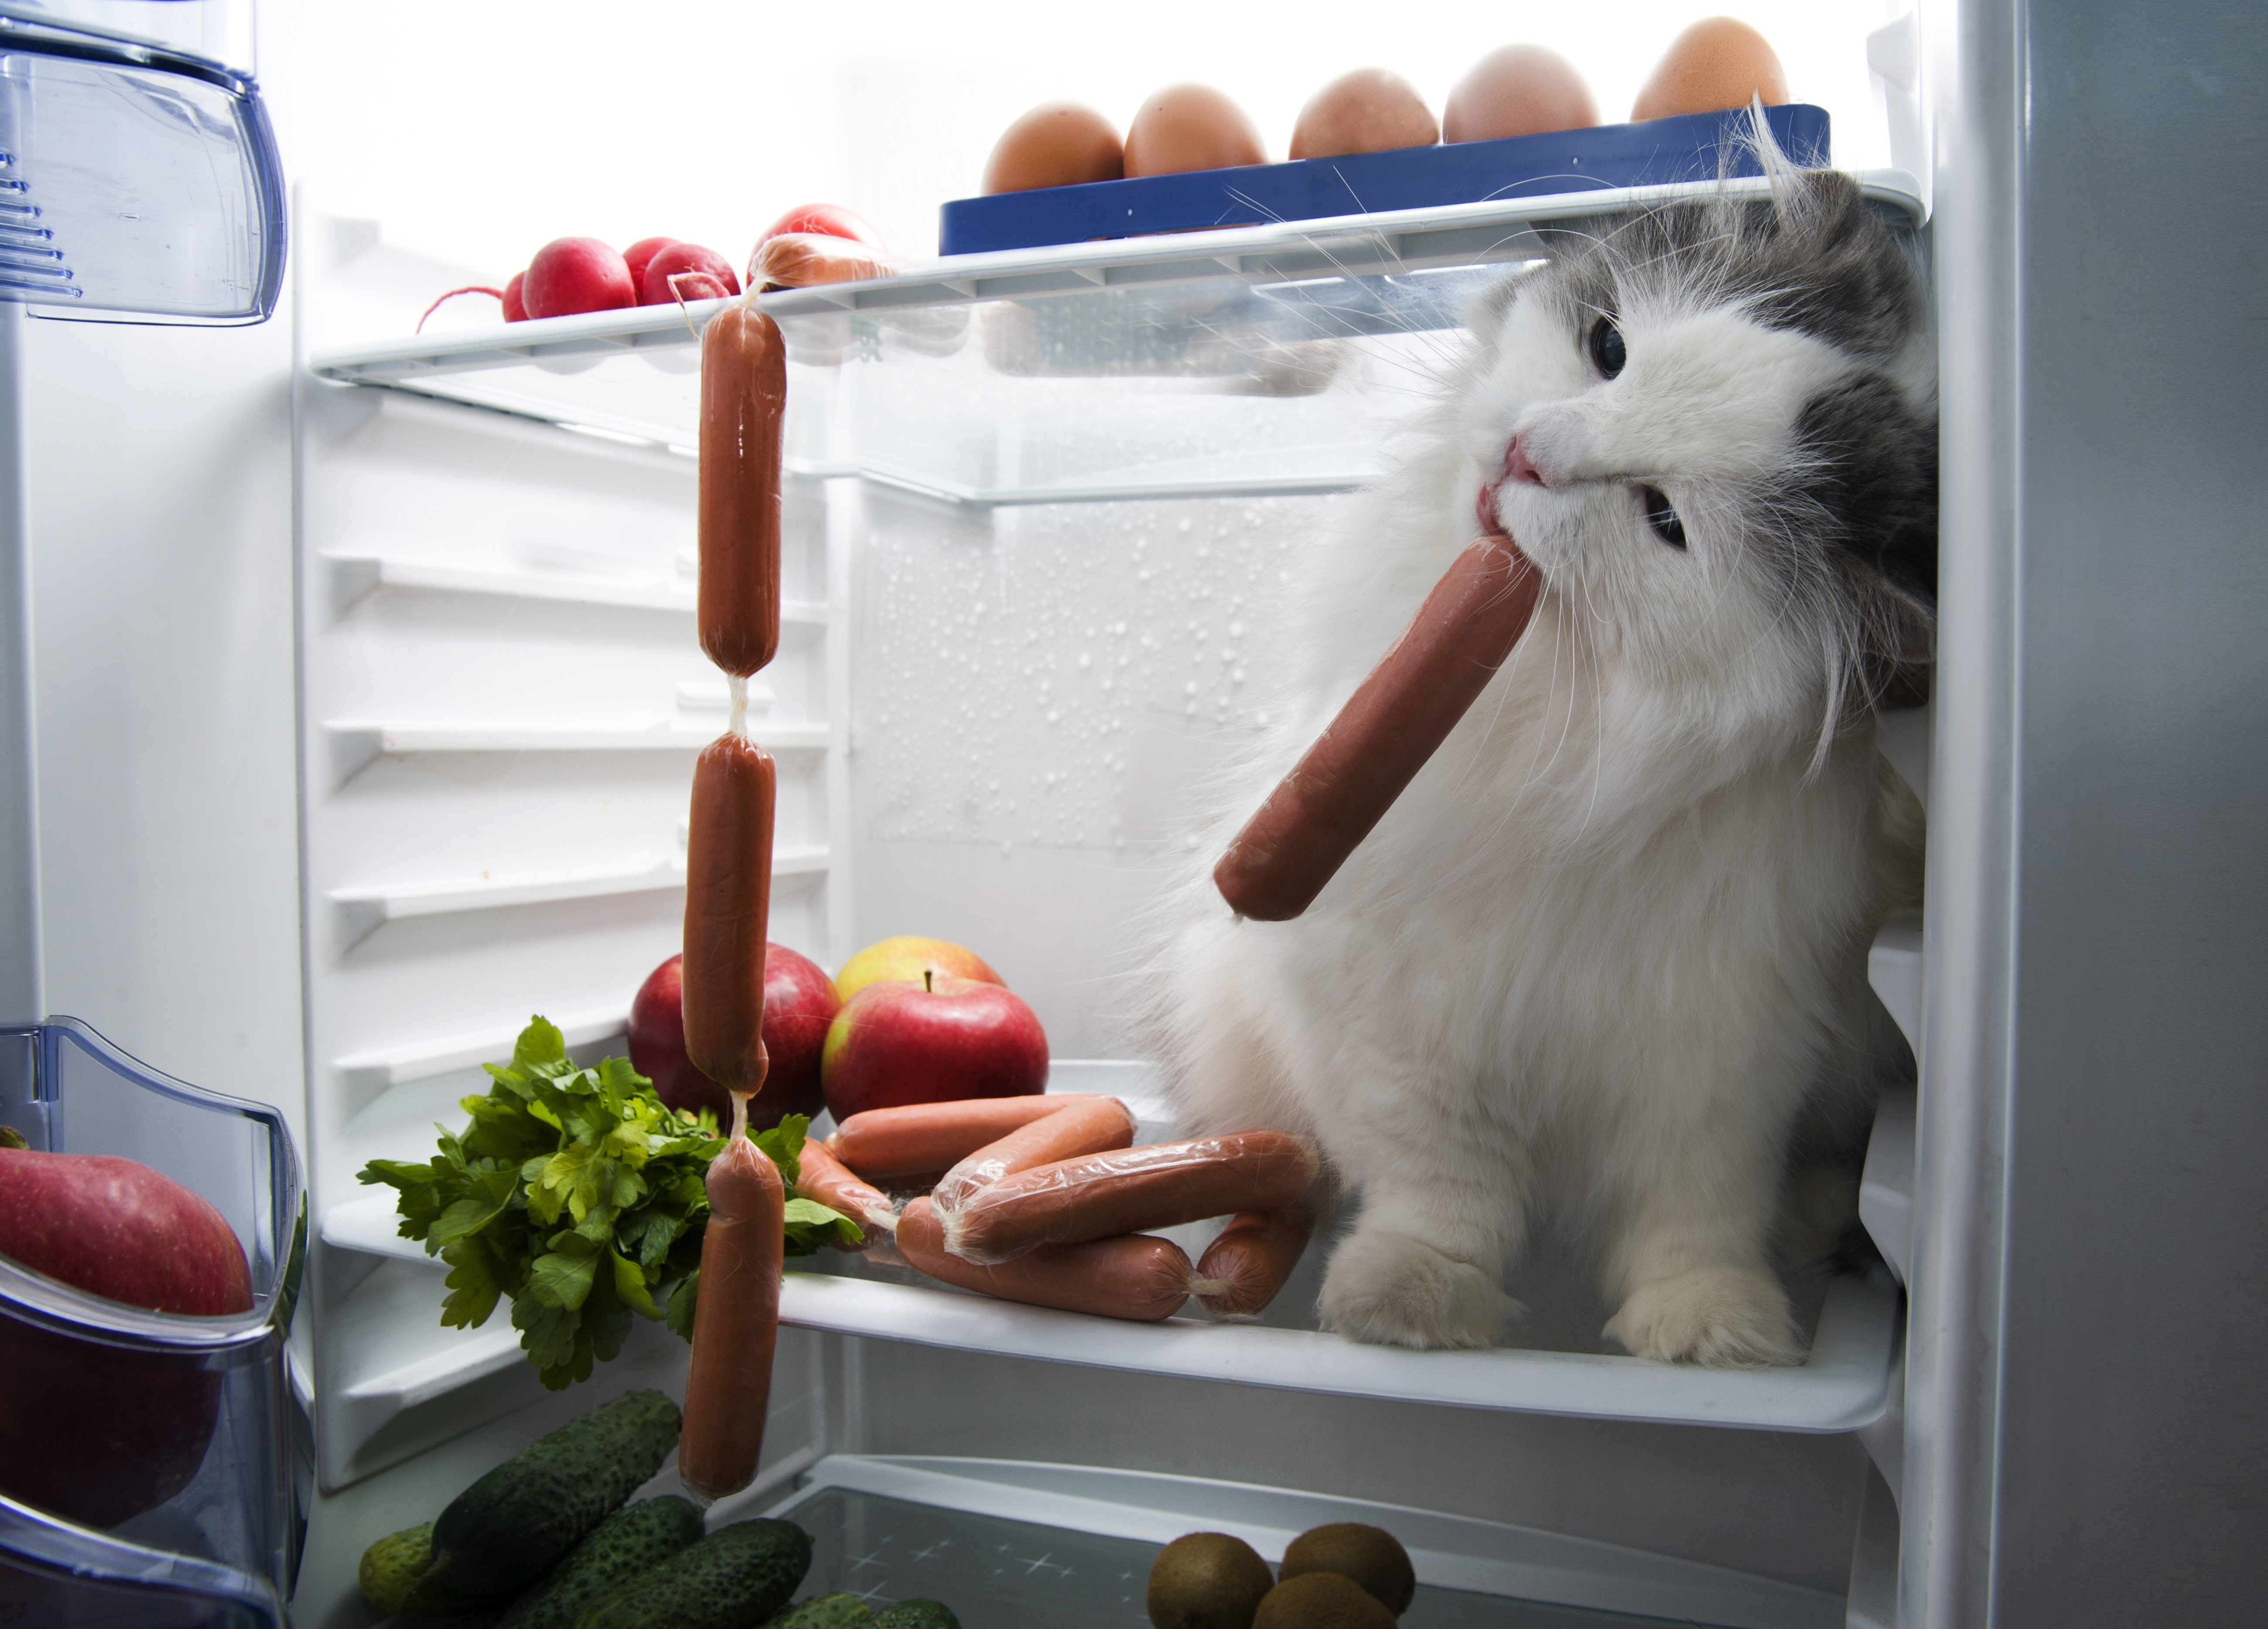 The cat sits in the fridge and eats a sausage